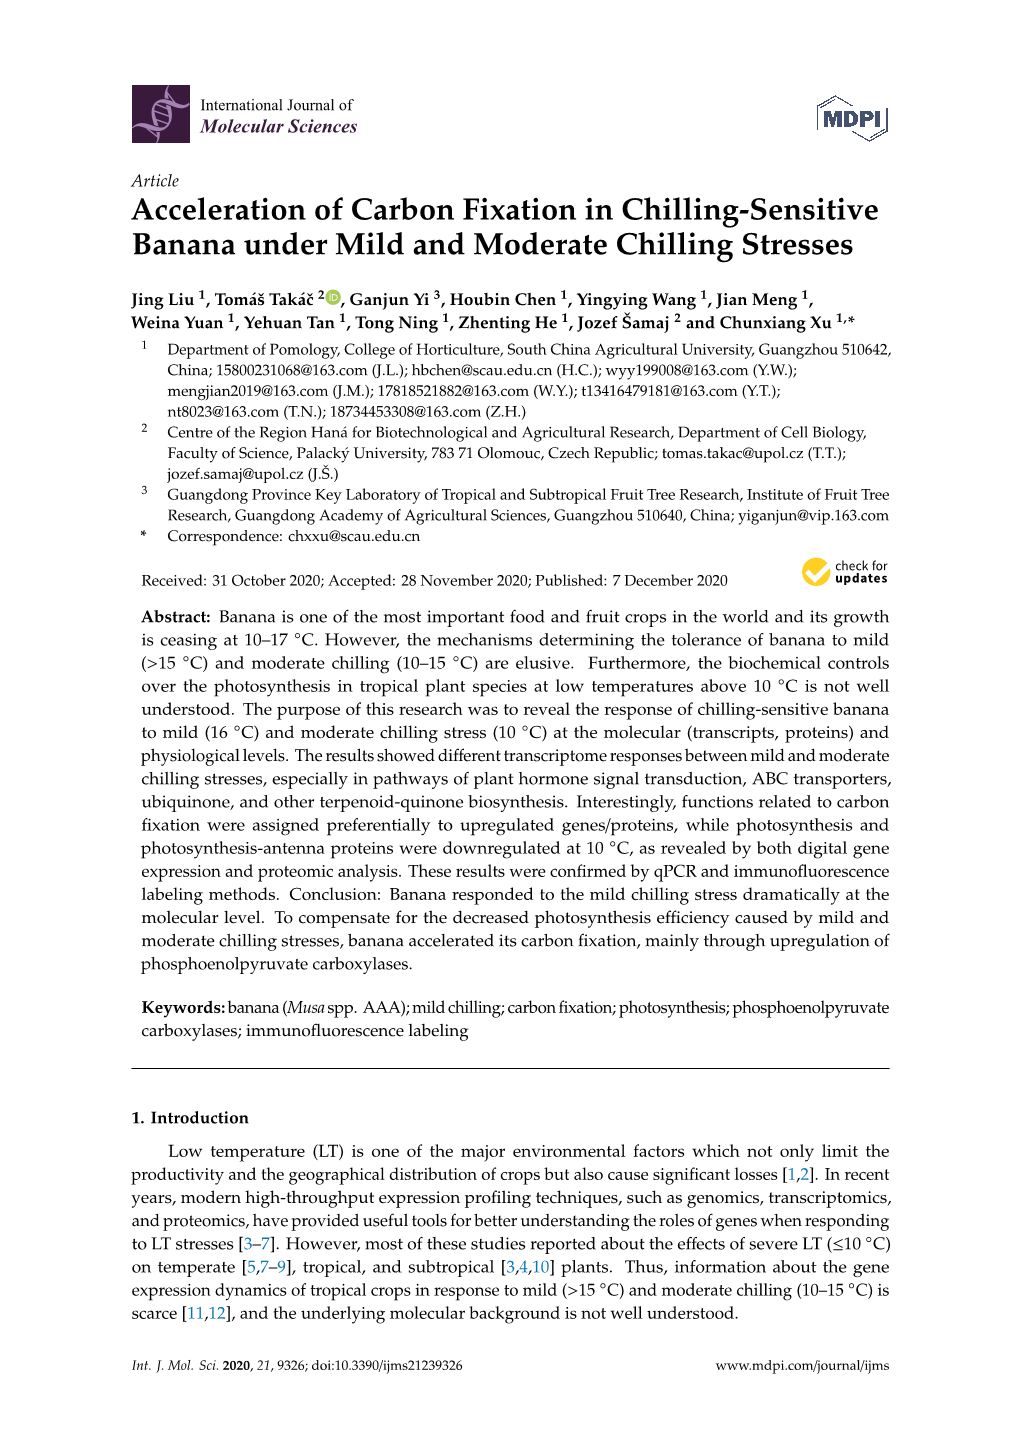 Acceleration of Carbon Fixation in Chilling-Sensitive Banana Under Mild and Moderate Chilling Stresses